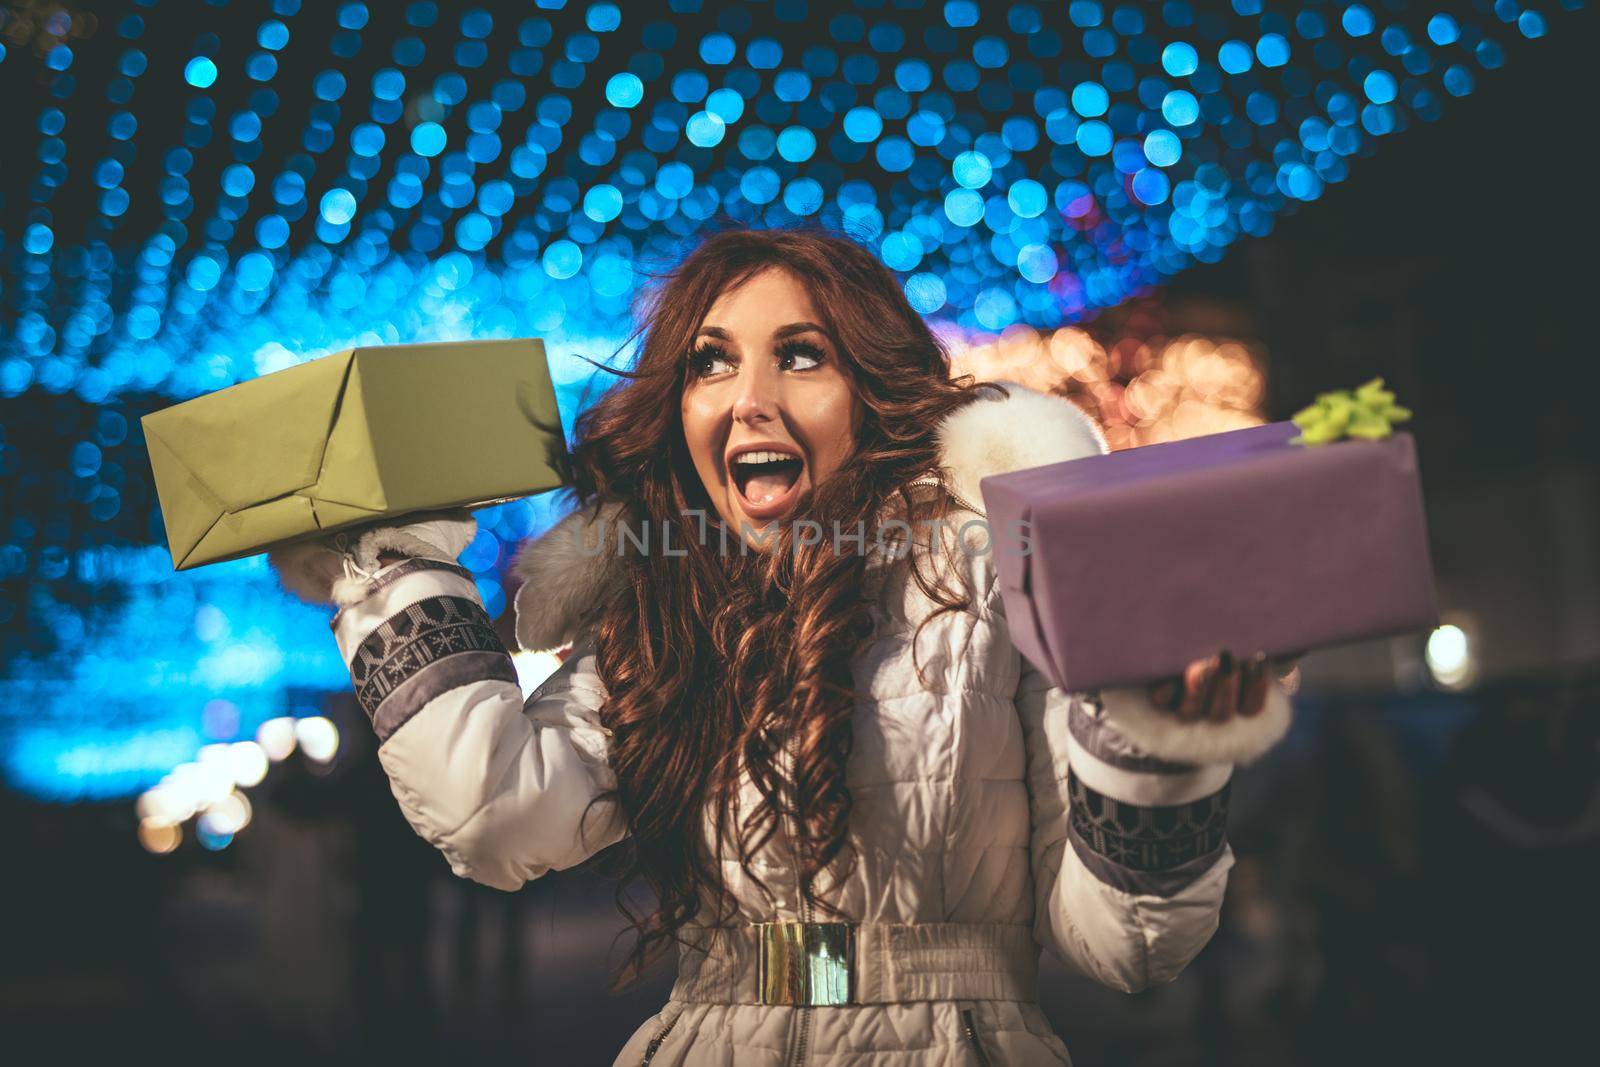 Cheerful young woman with present having fun in the city street at the Christmas time.